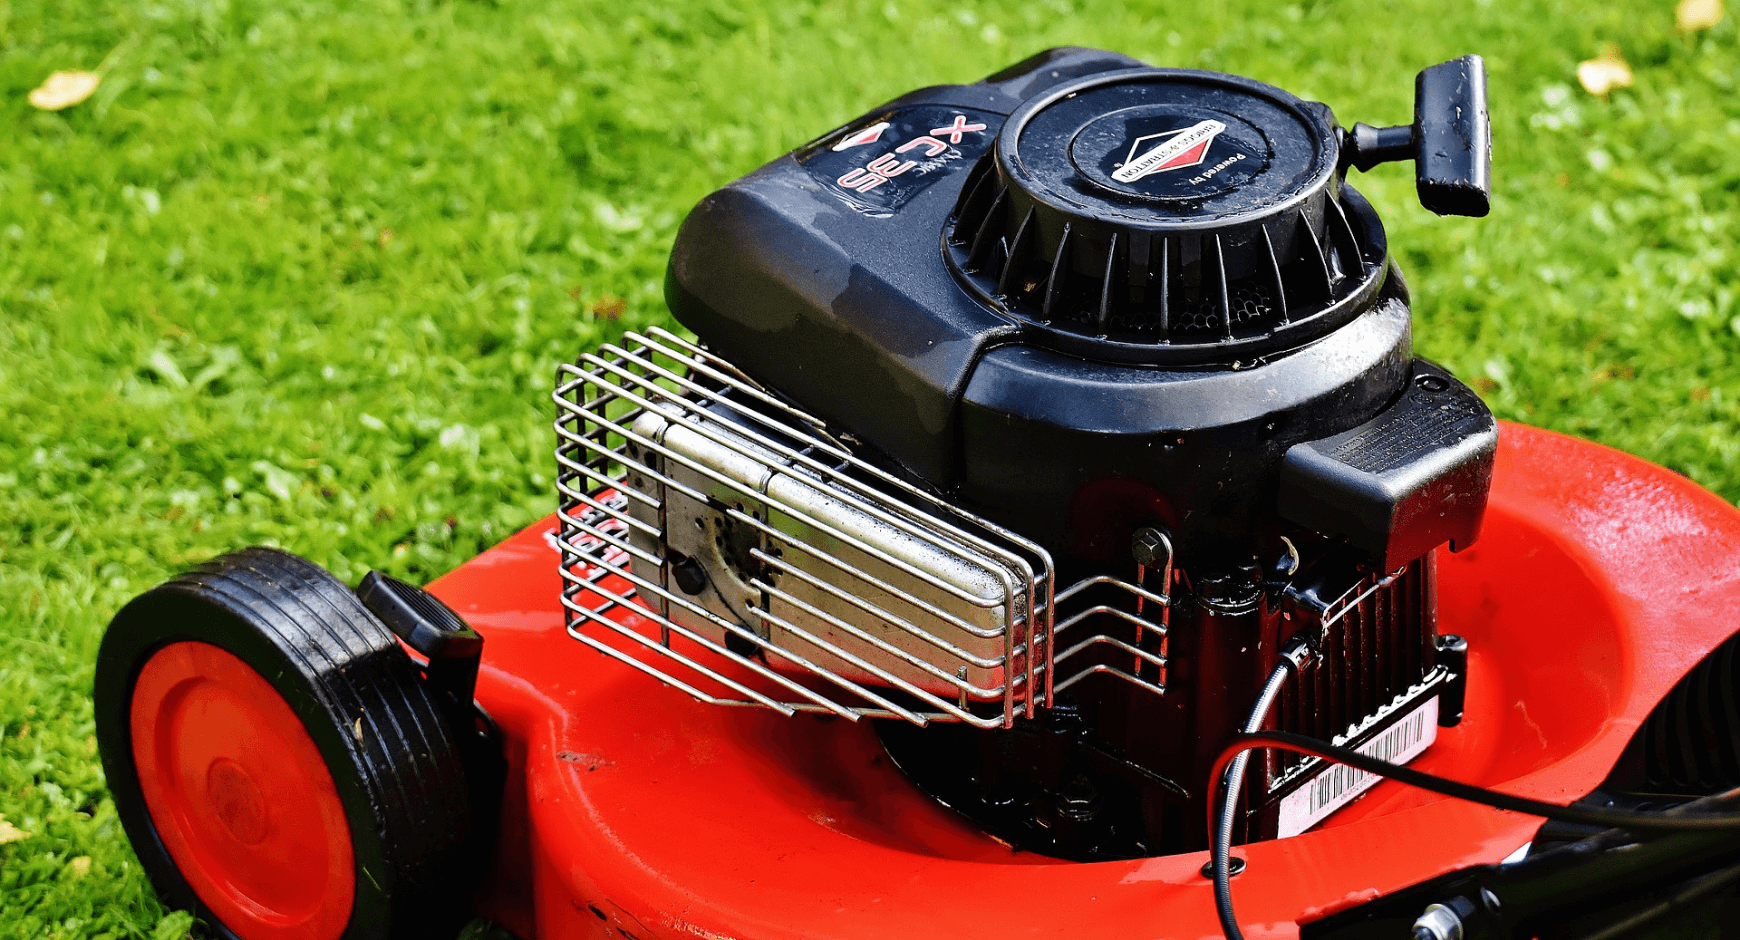 checklist for house maintenance includes mowing the lawn